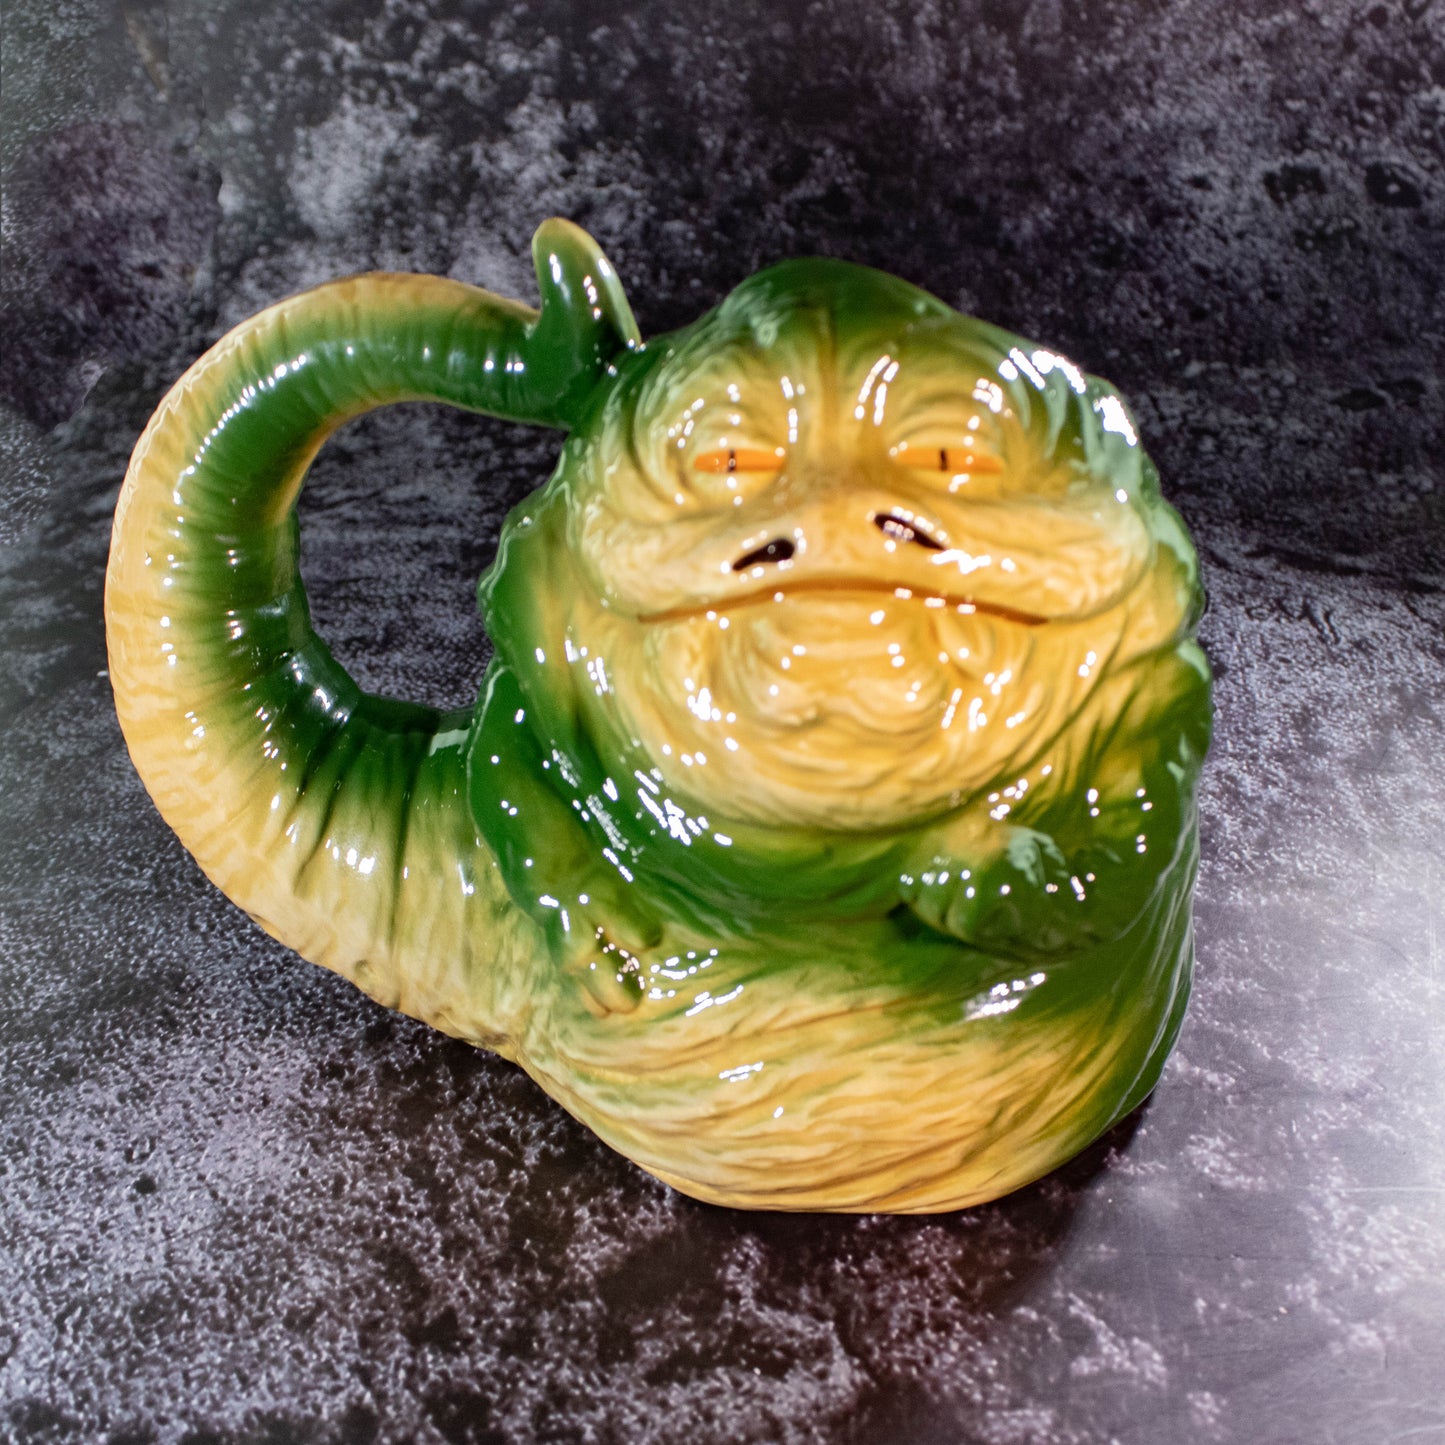 Load image into Gallery viewer, Jabba The Hutt (Star Wars) 20 oz. Sculpted Ceramic Mug
